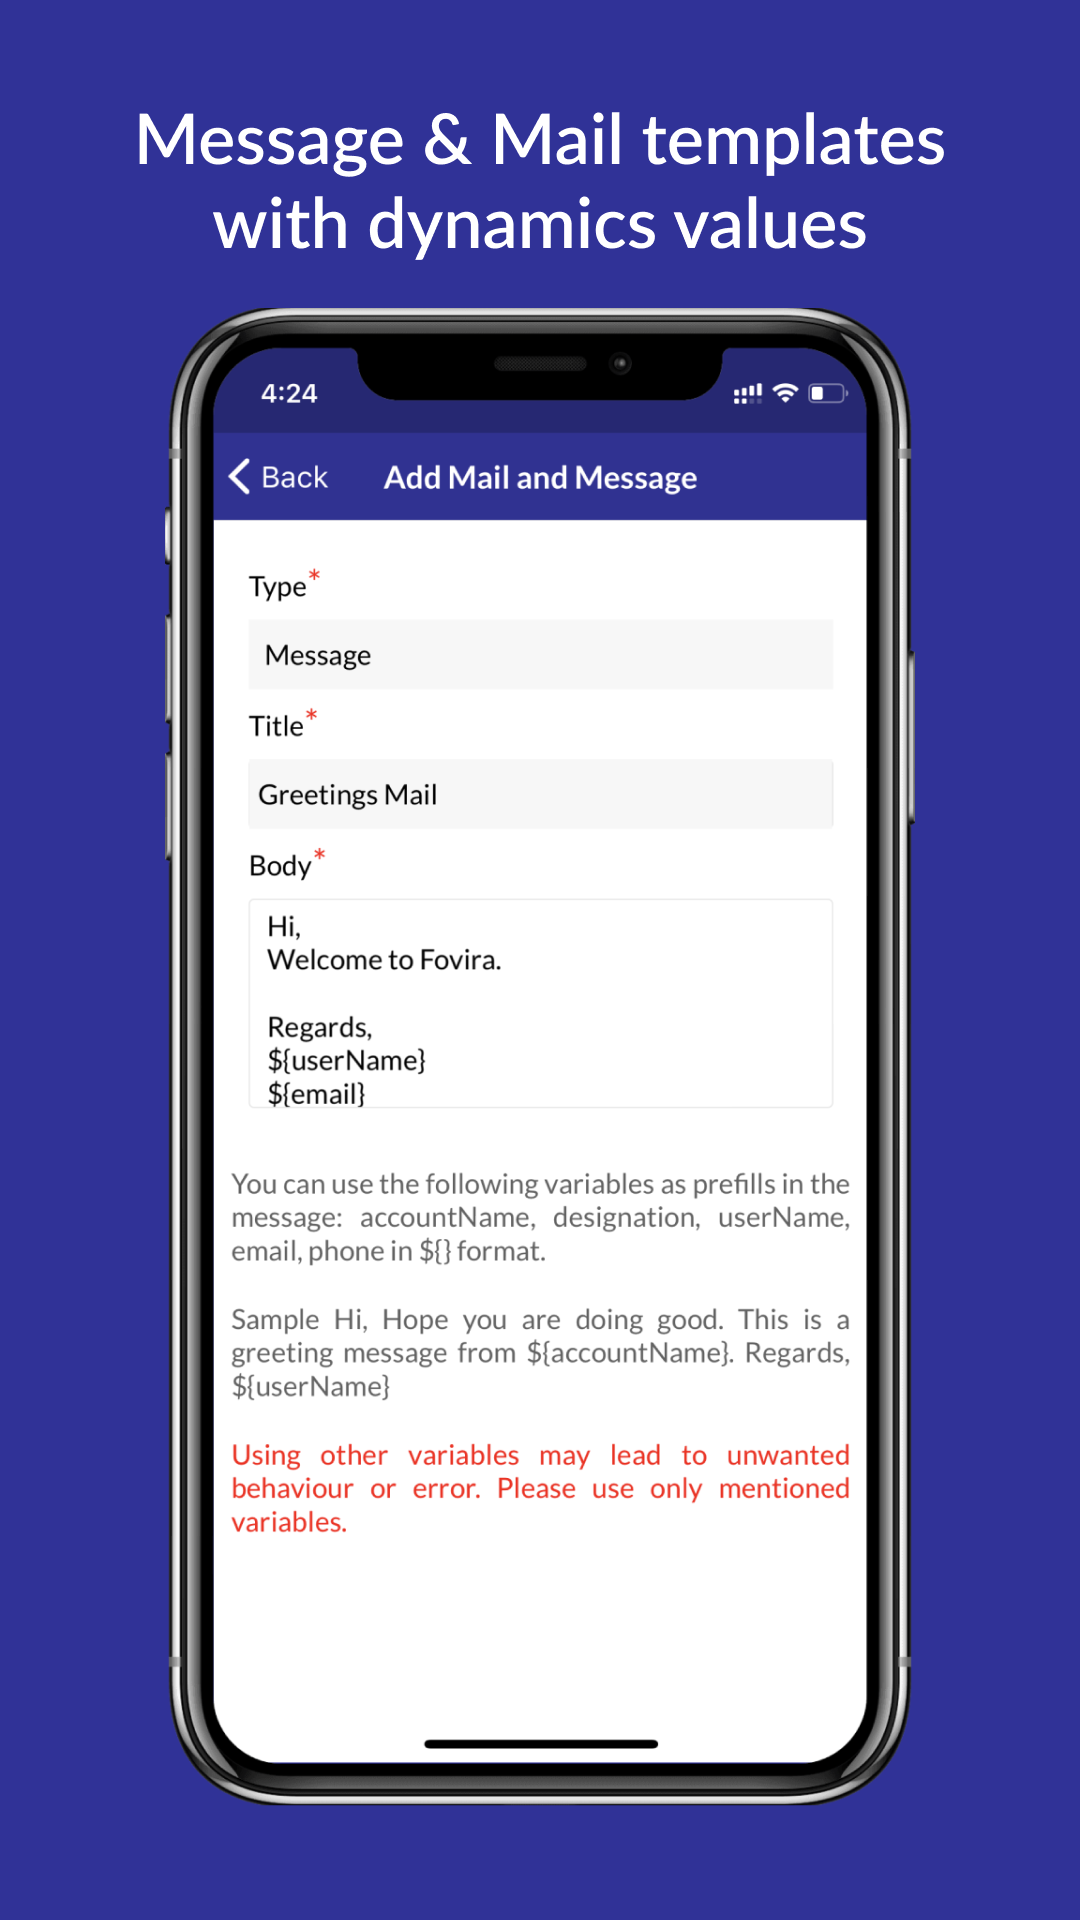 Save message and email templates with dynamic values. Your team can quickly send messages or emails to your contacts with ease.